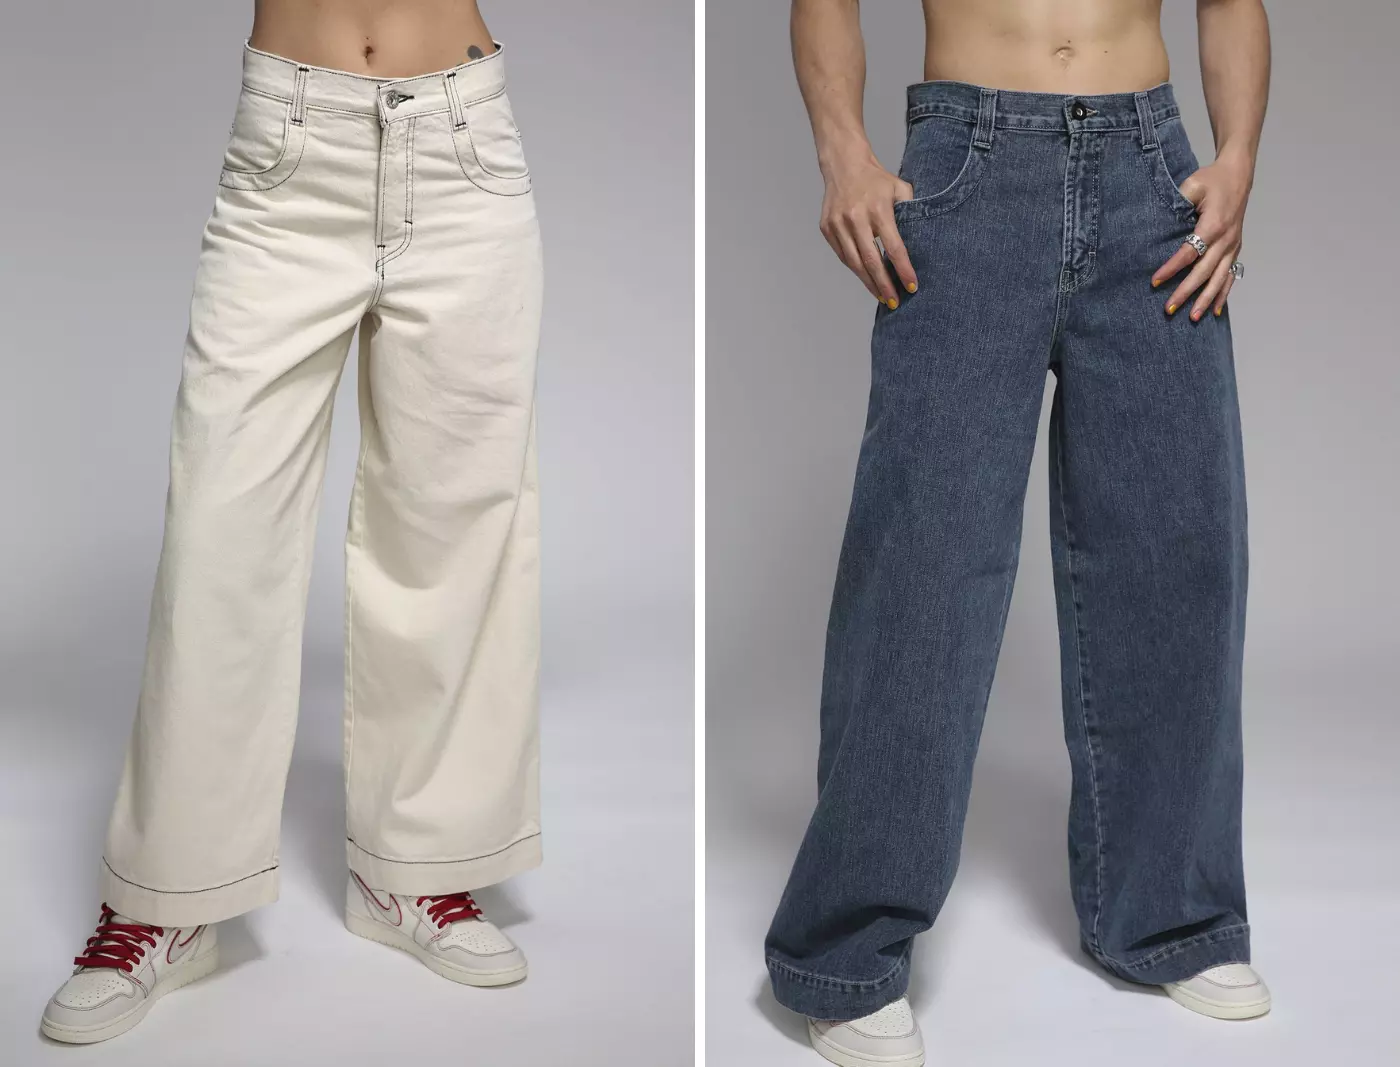 Attention 90's Kids: JNCO Jeans Are Back!